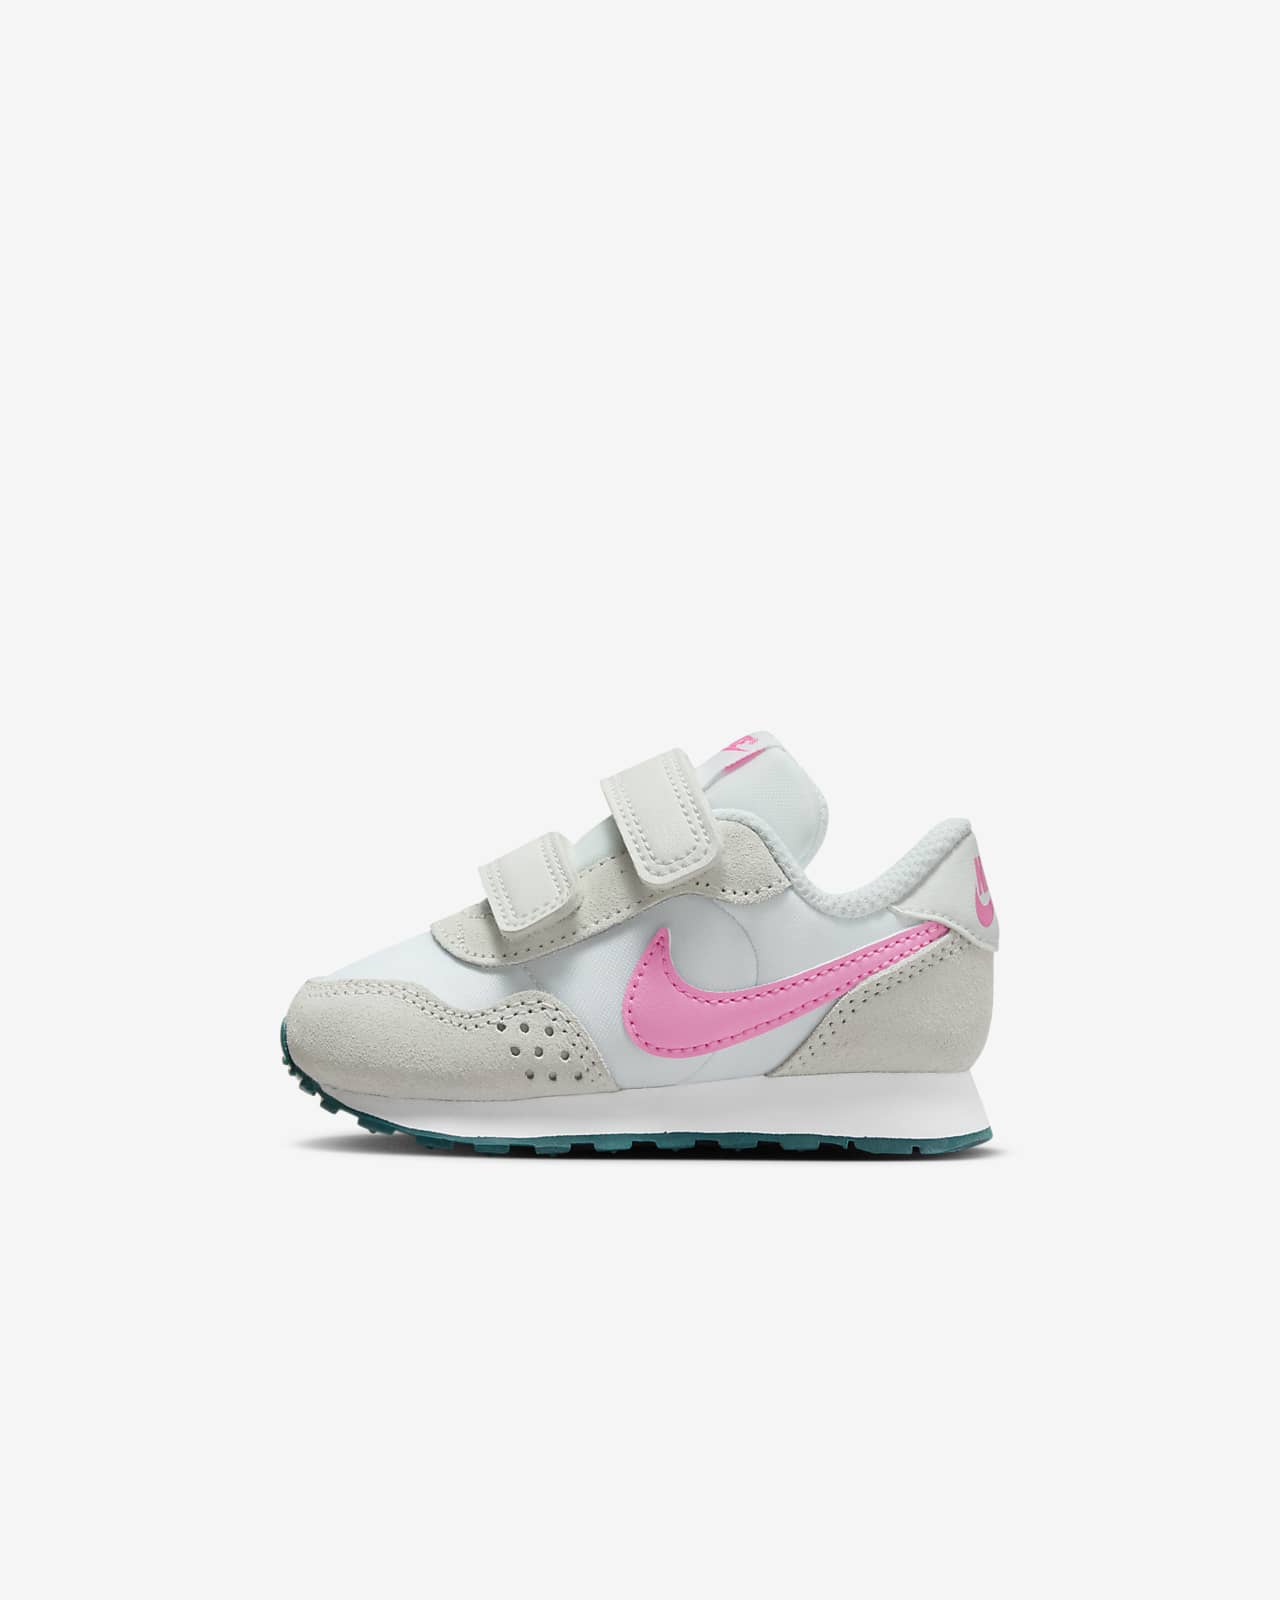 Nike MD Baby and Toddler Shoe.